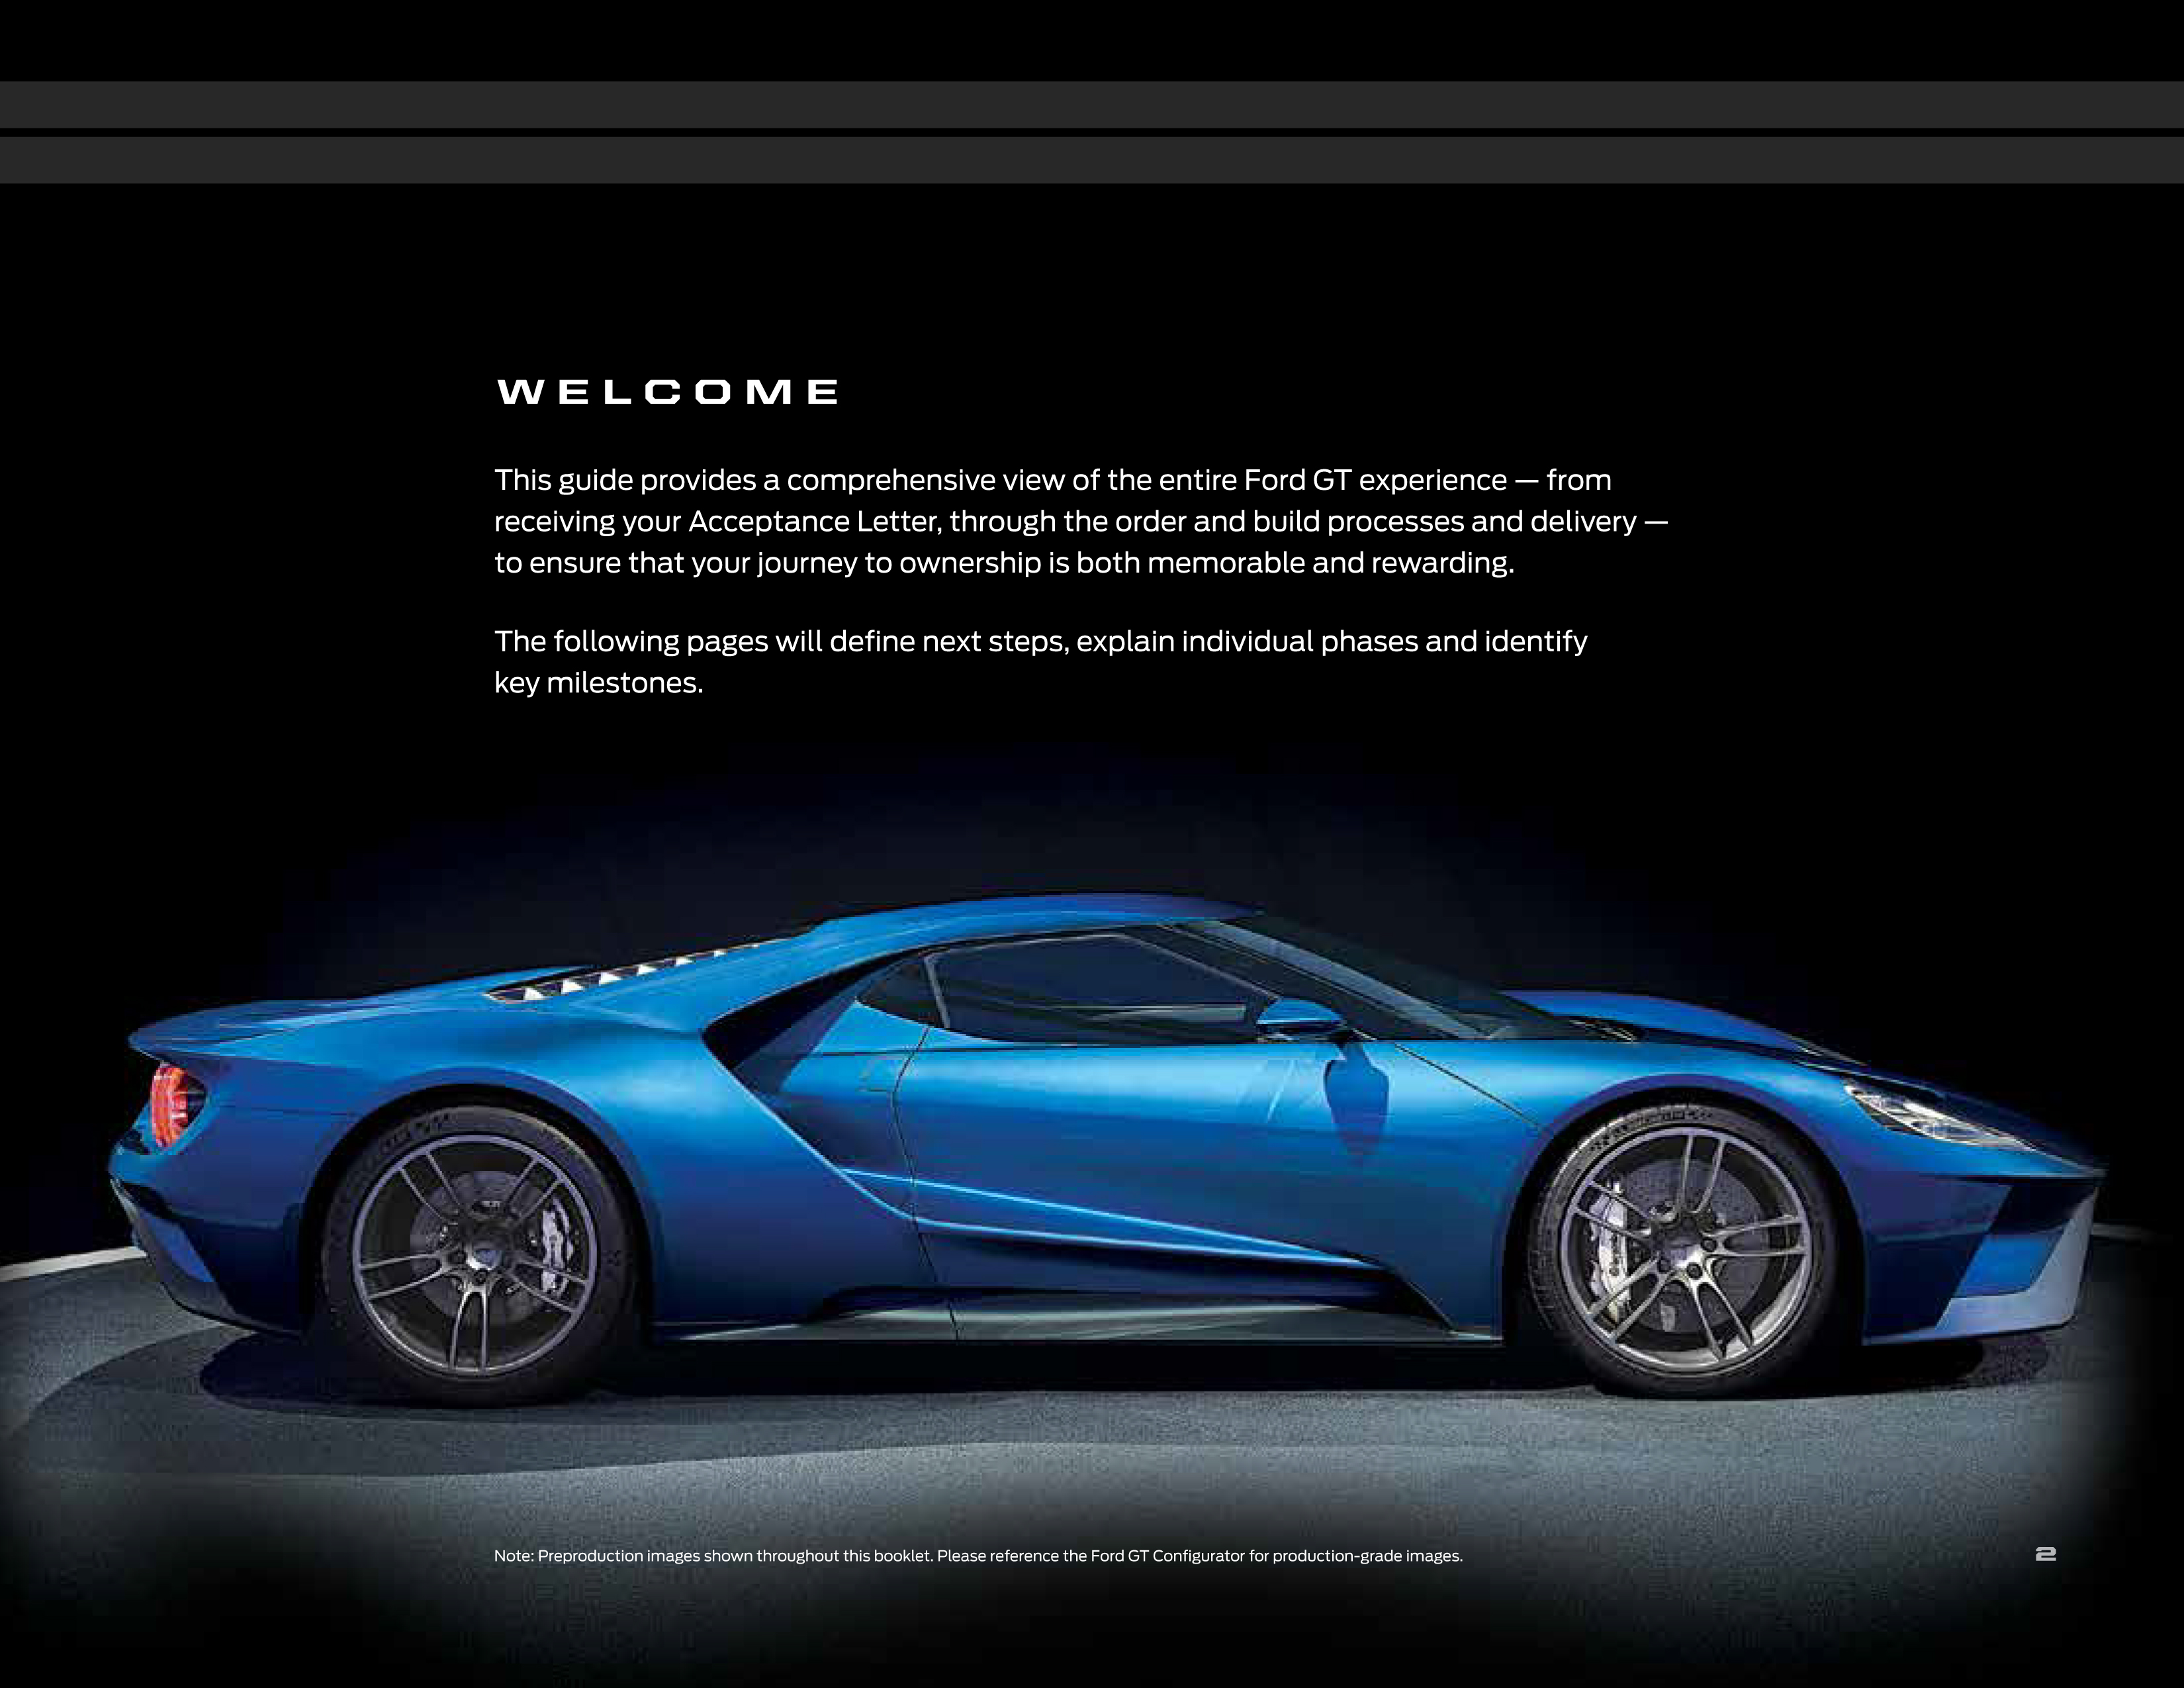 2017 Ford GT US Welcome Guide